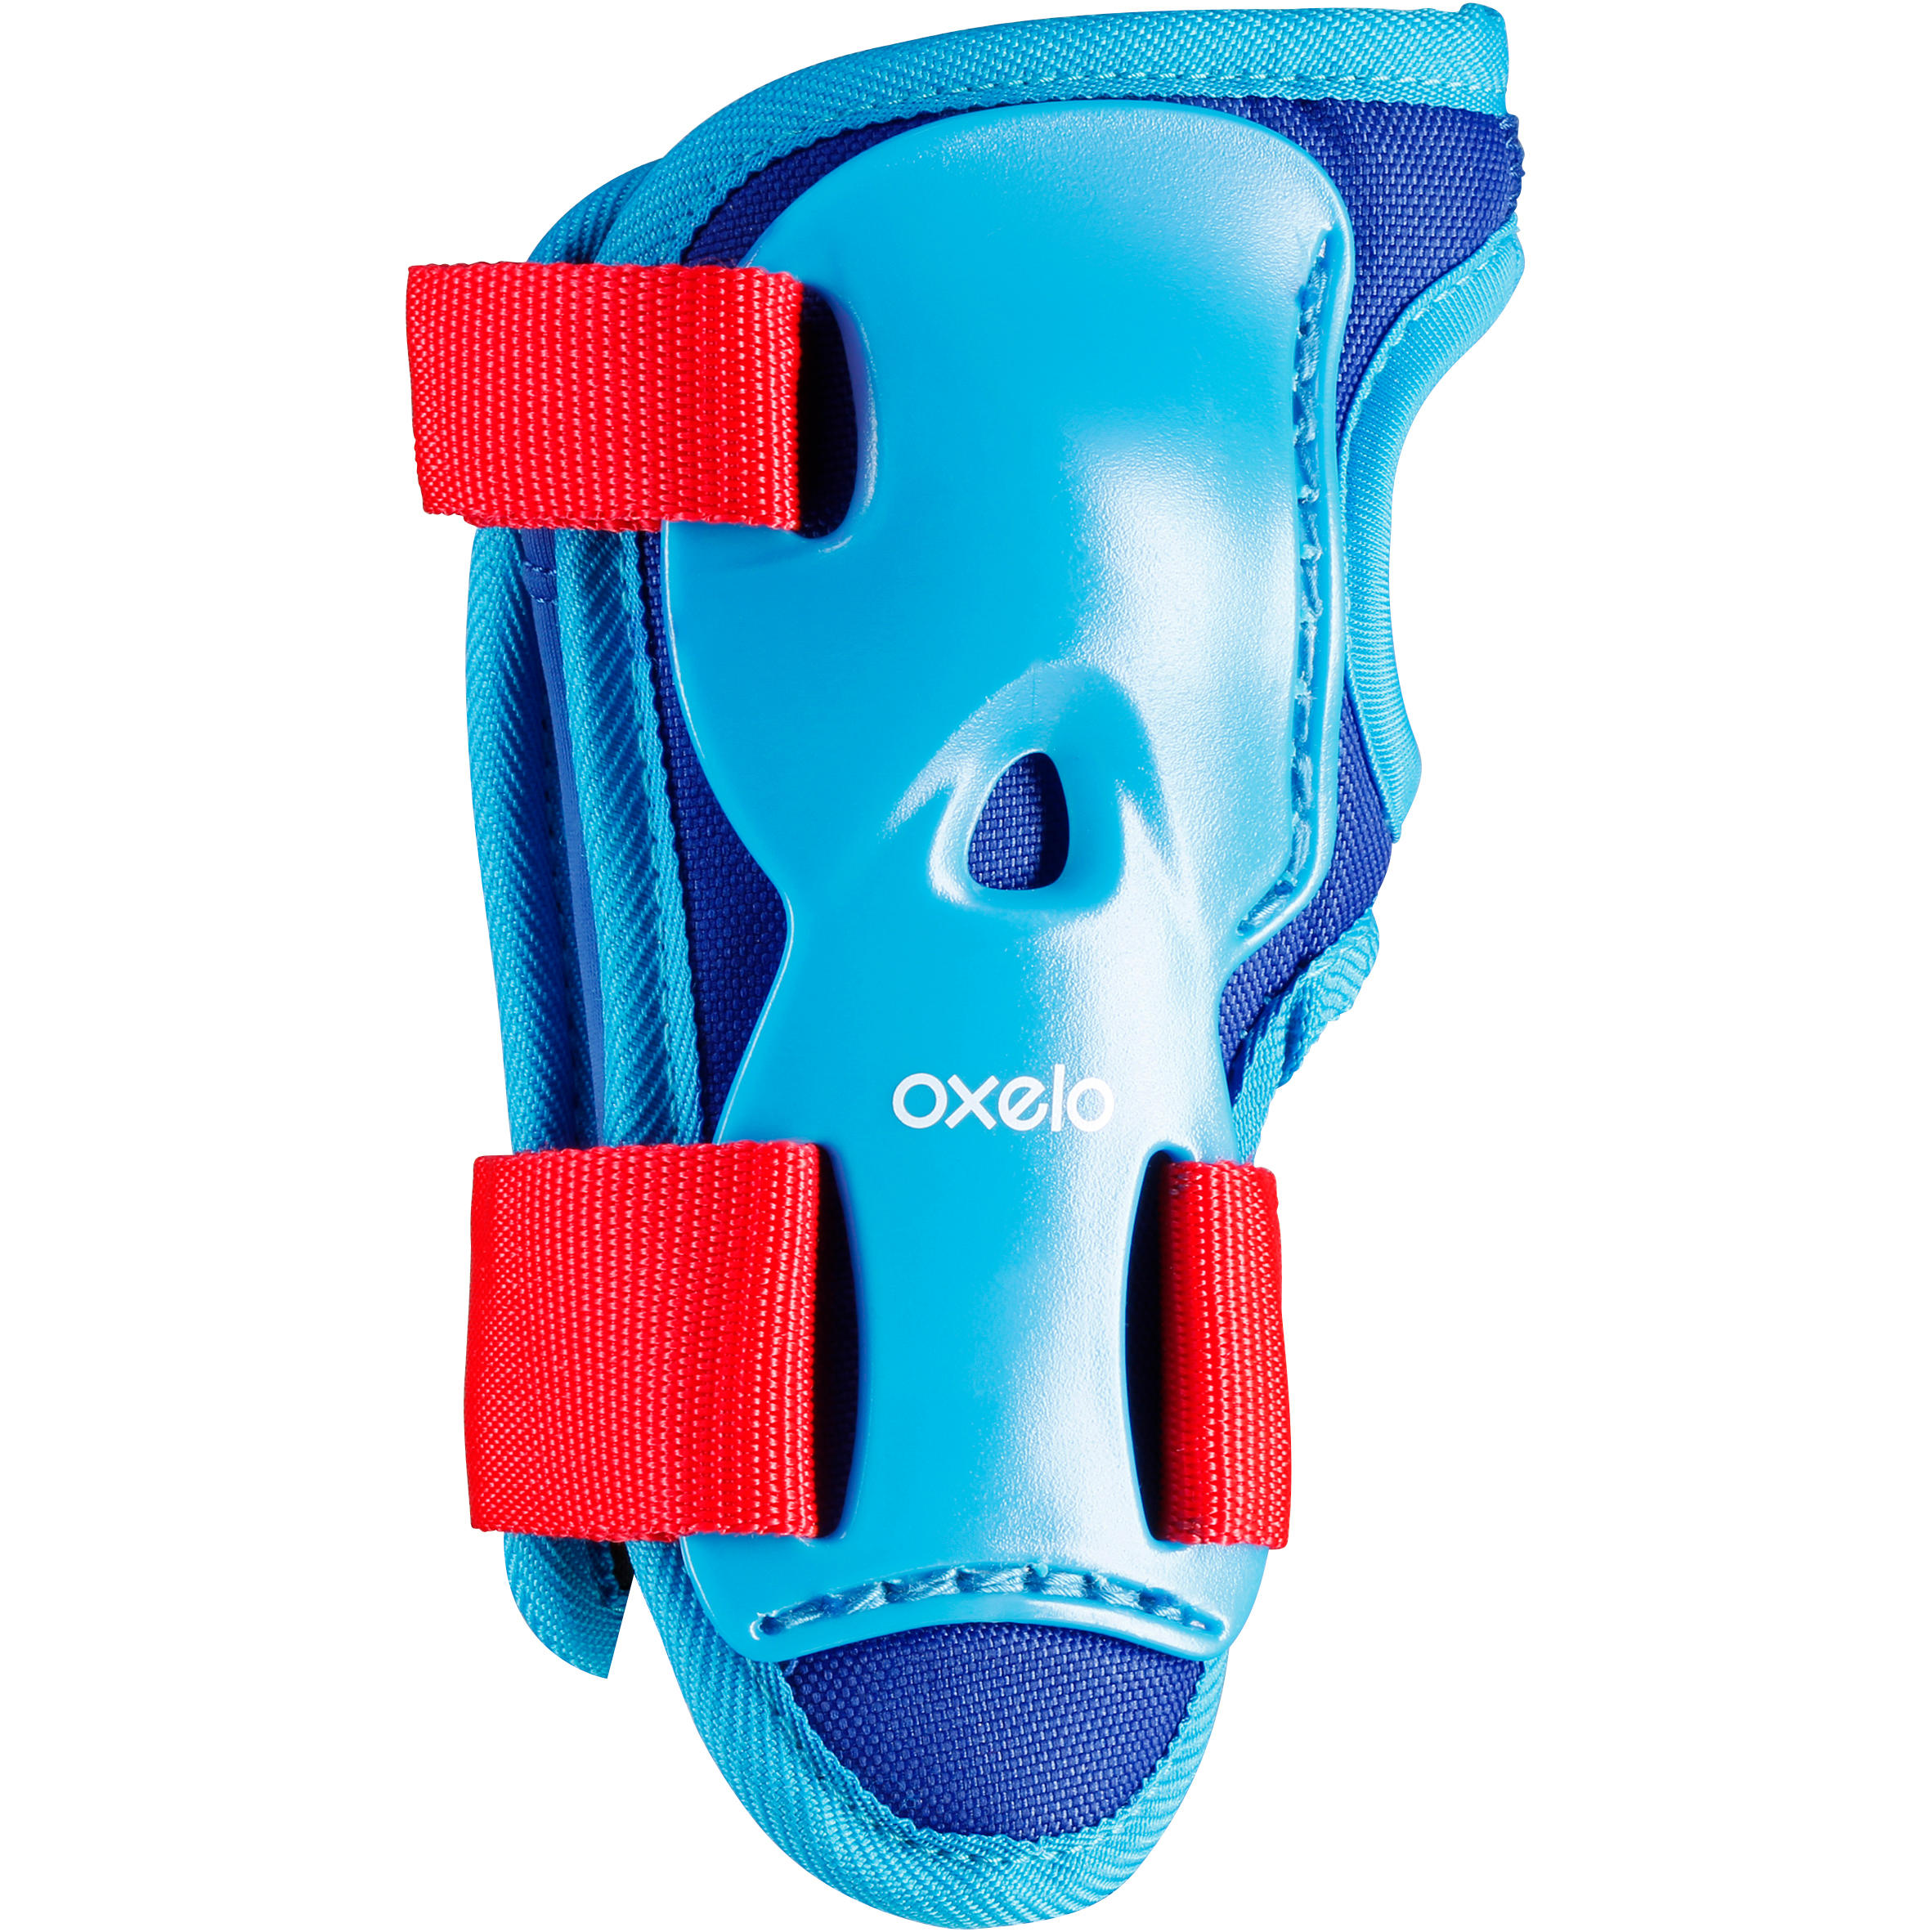 Kids' Inline Skate Protection Set - Blue/Red - OXELO